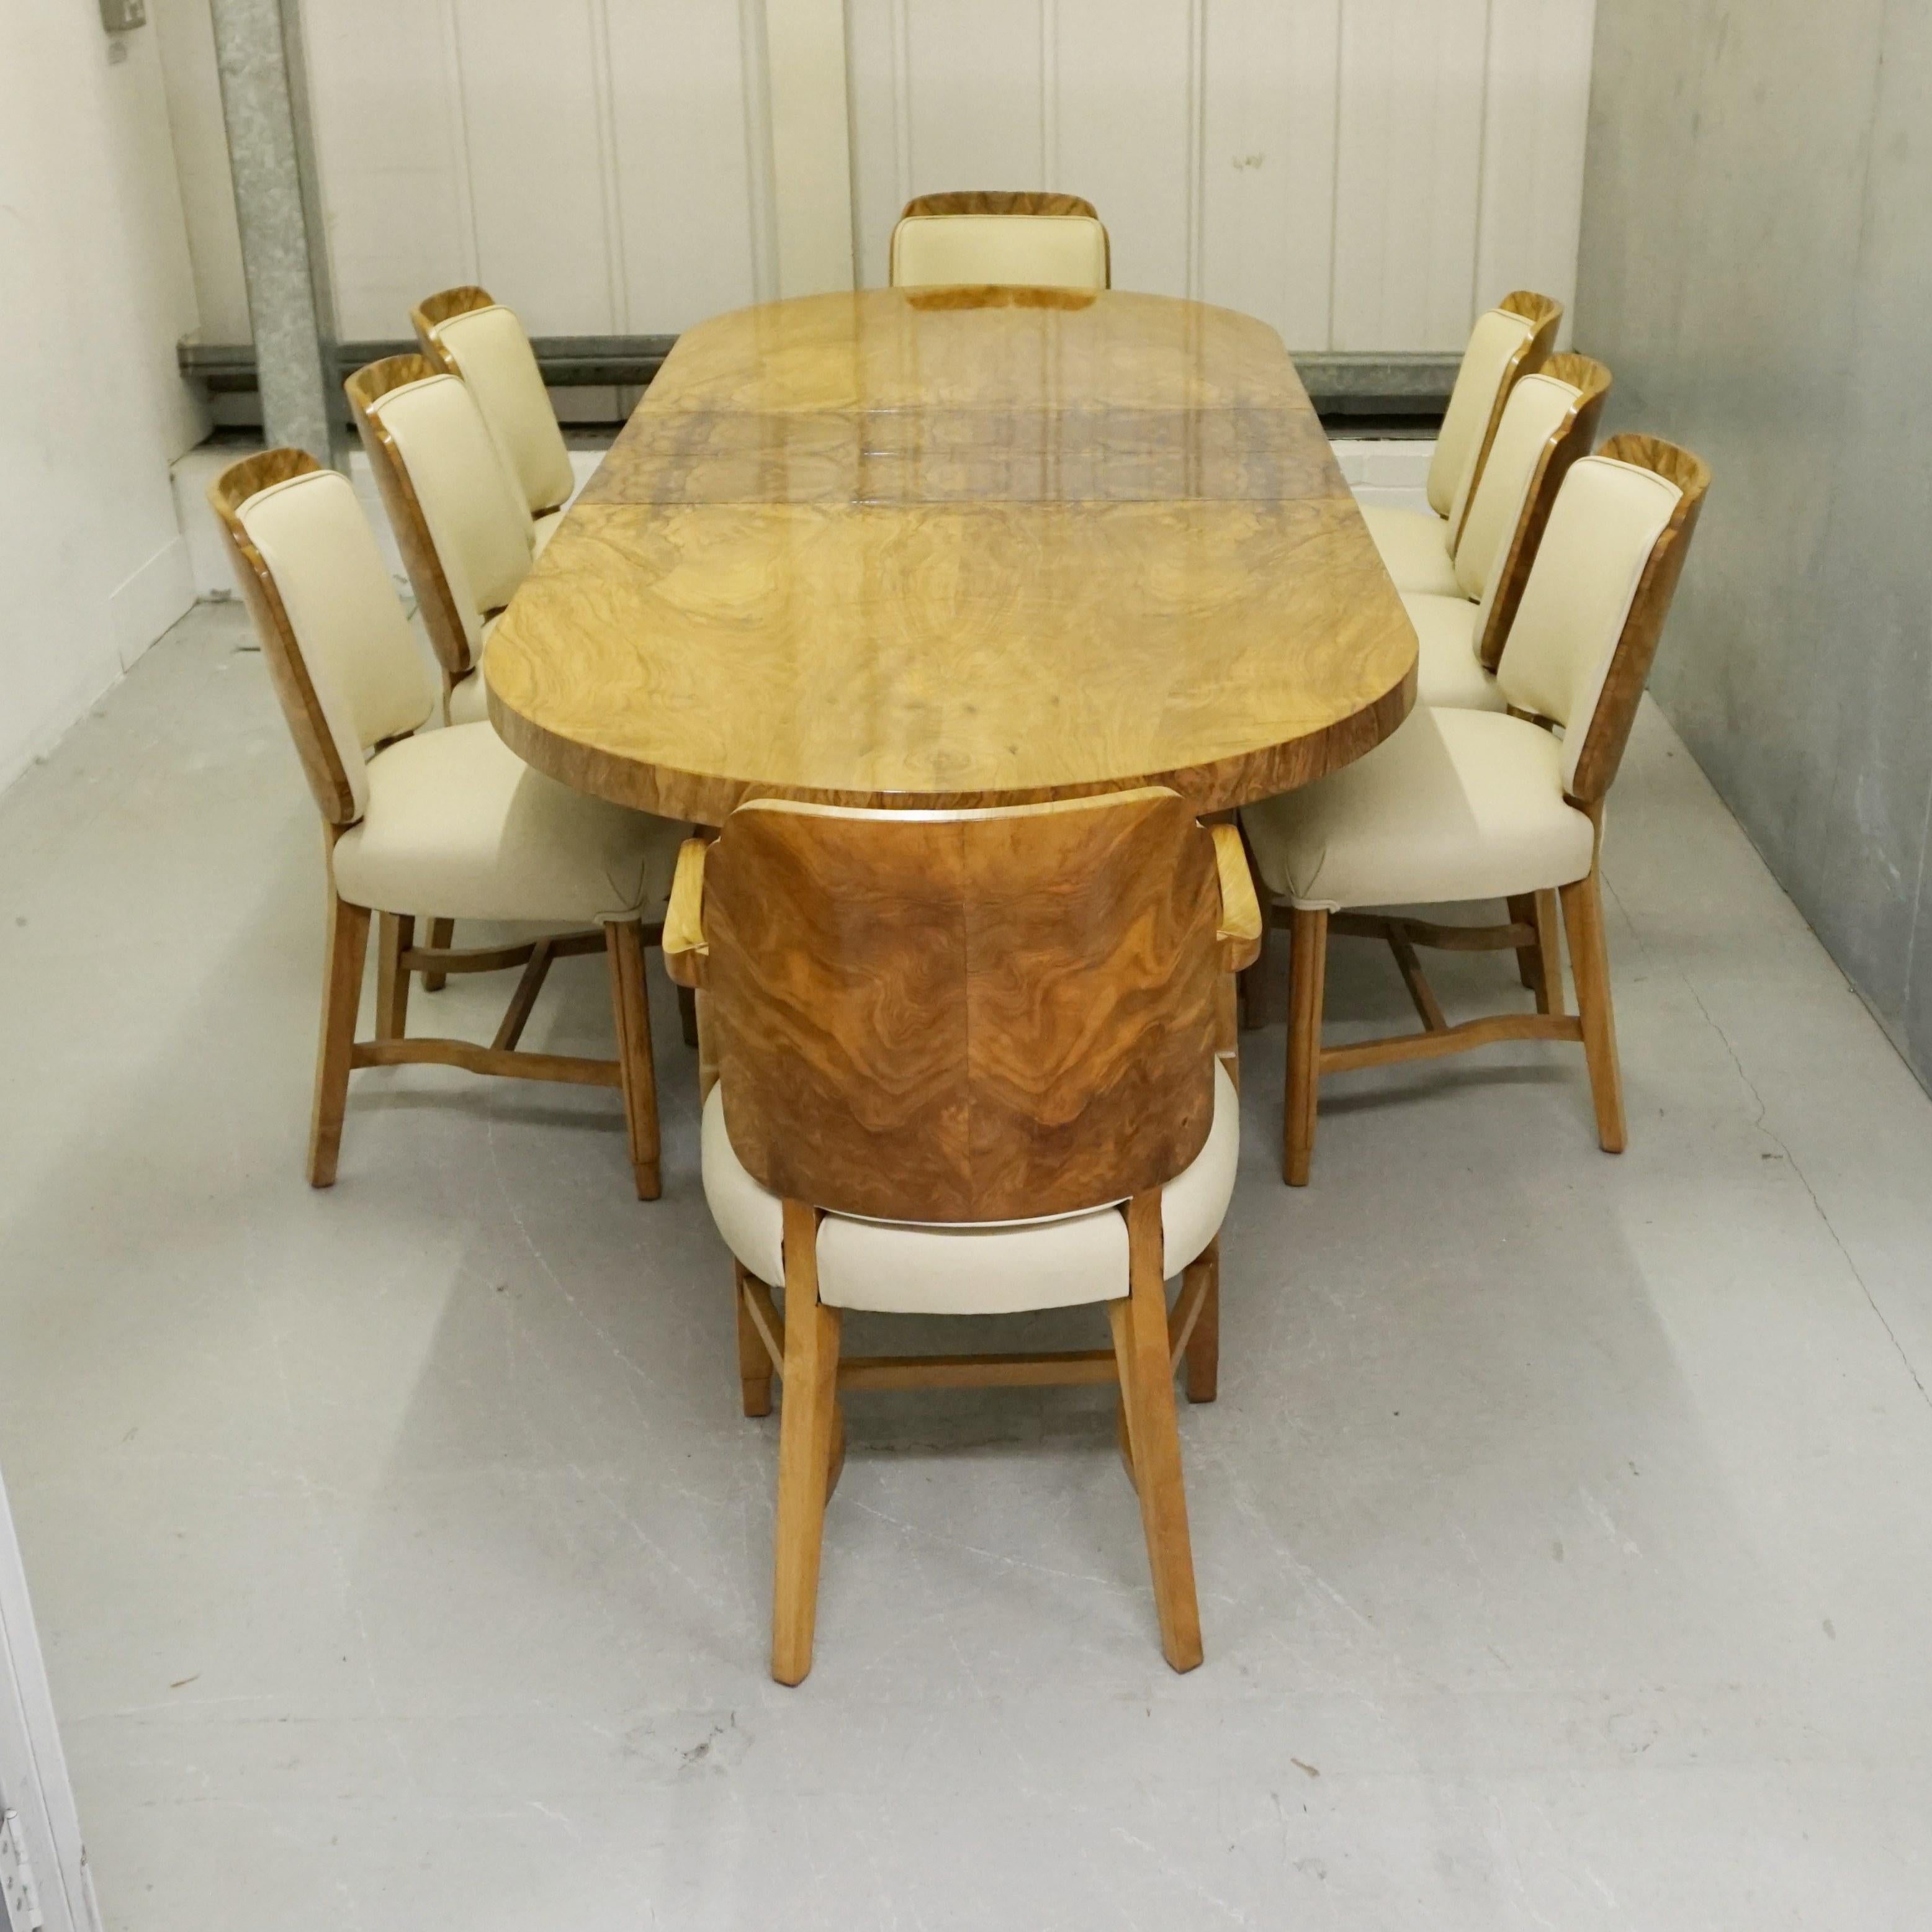 English Art Deco 8-Seat Extendable Dining Suite Attributed to Heal's of London